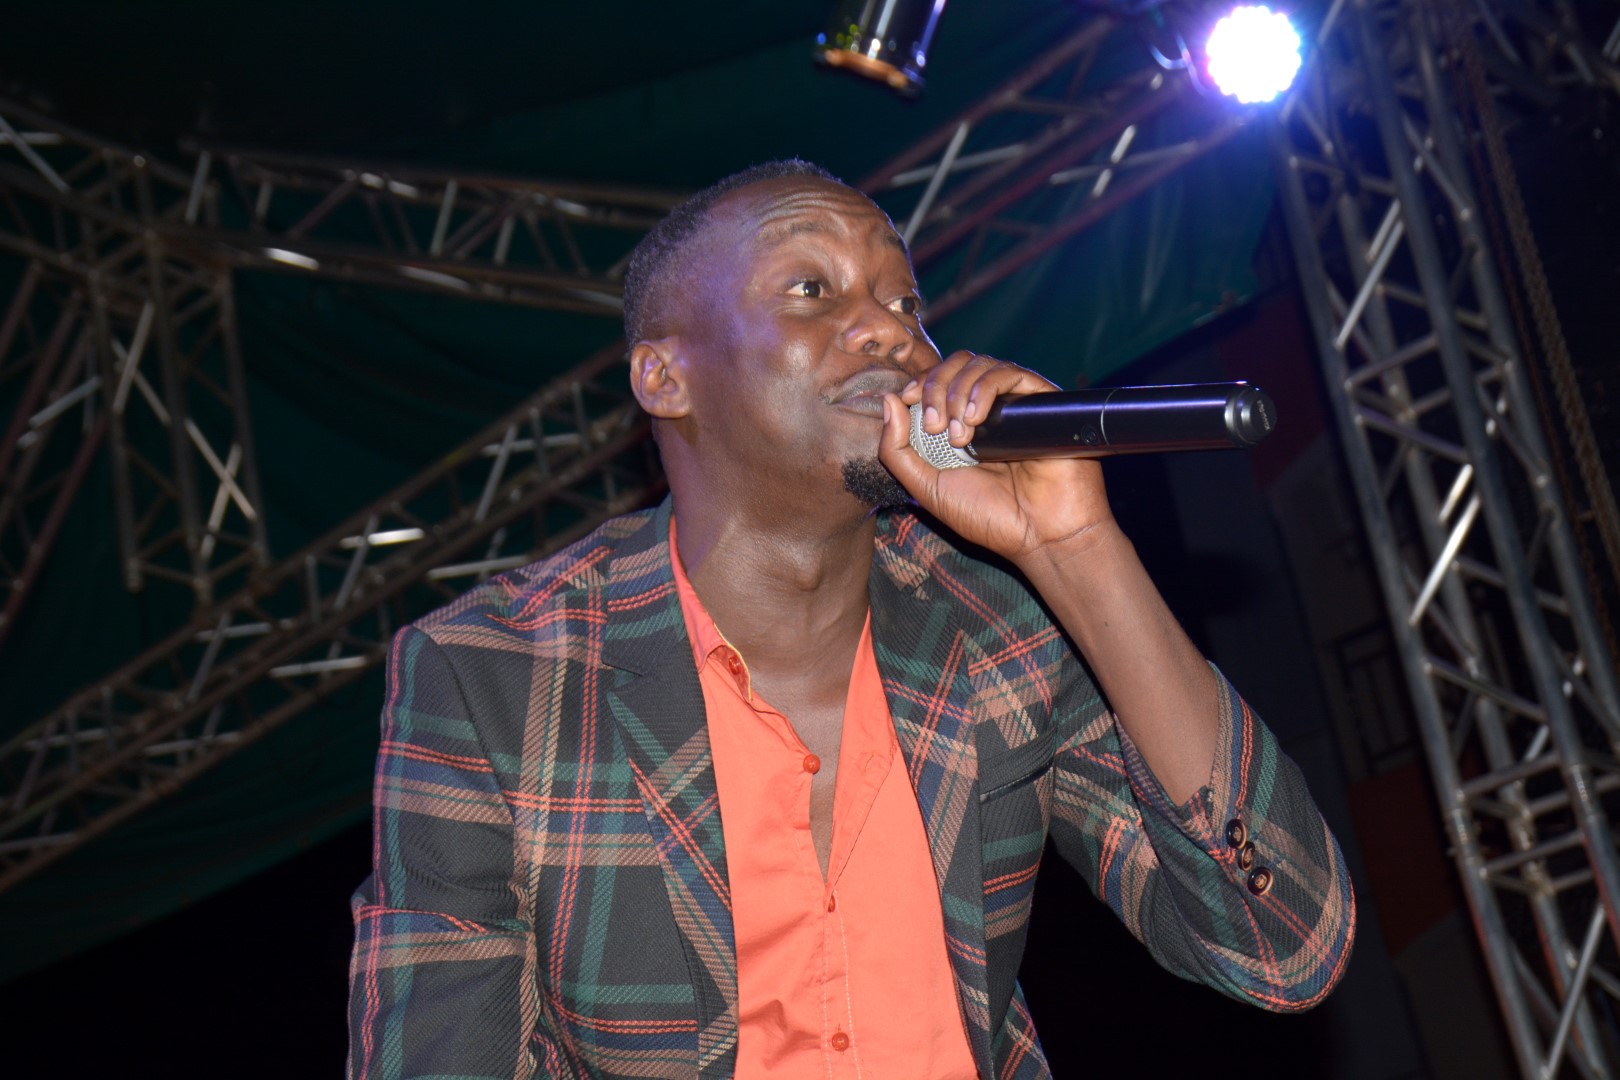 “I Owe My Fans”-Mesach Semakula Speaks Out Ahead Of Concert - Chano8